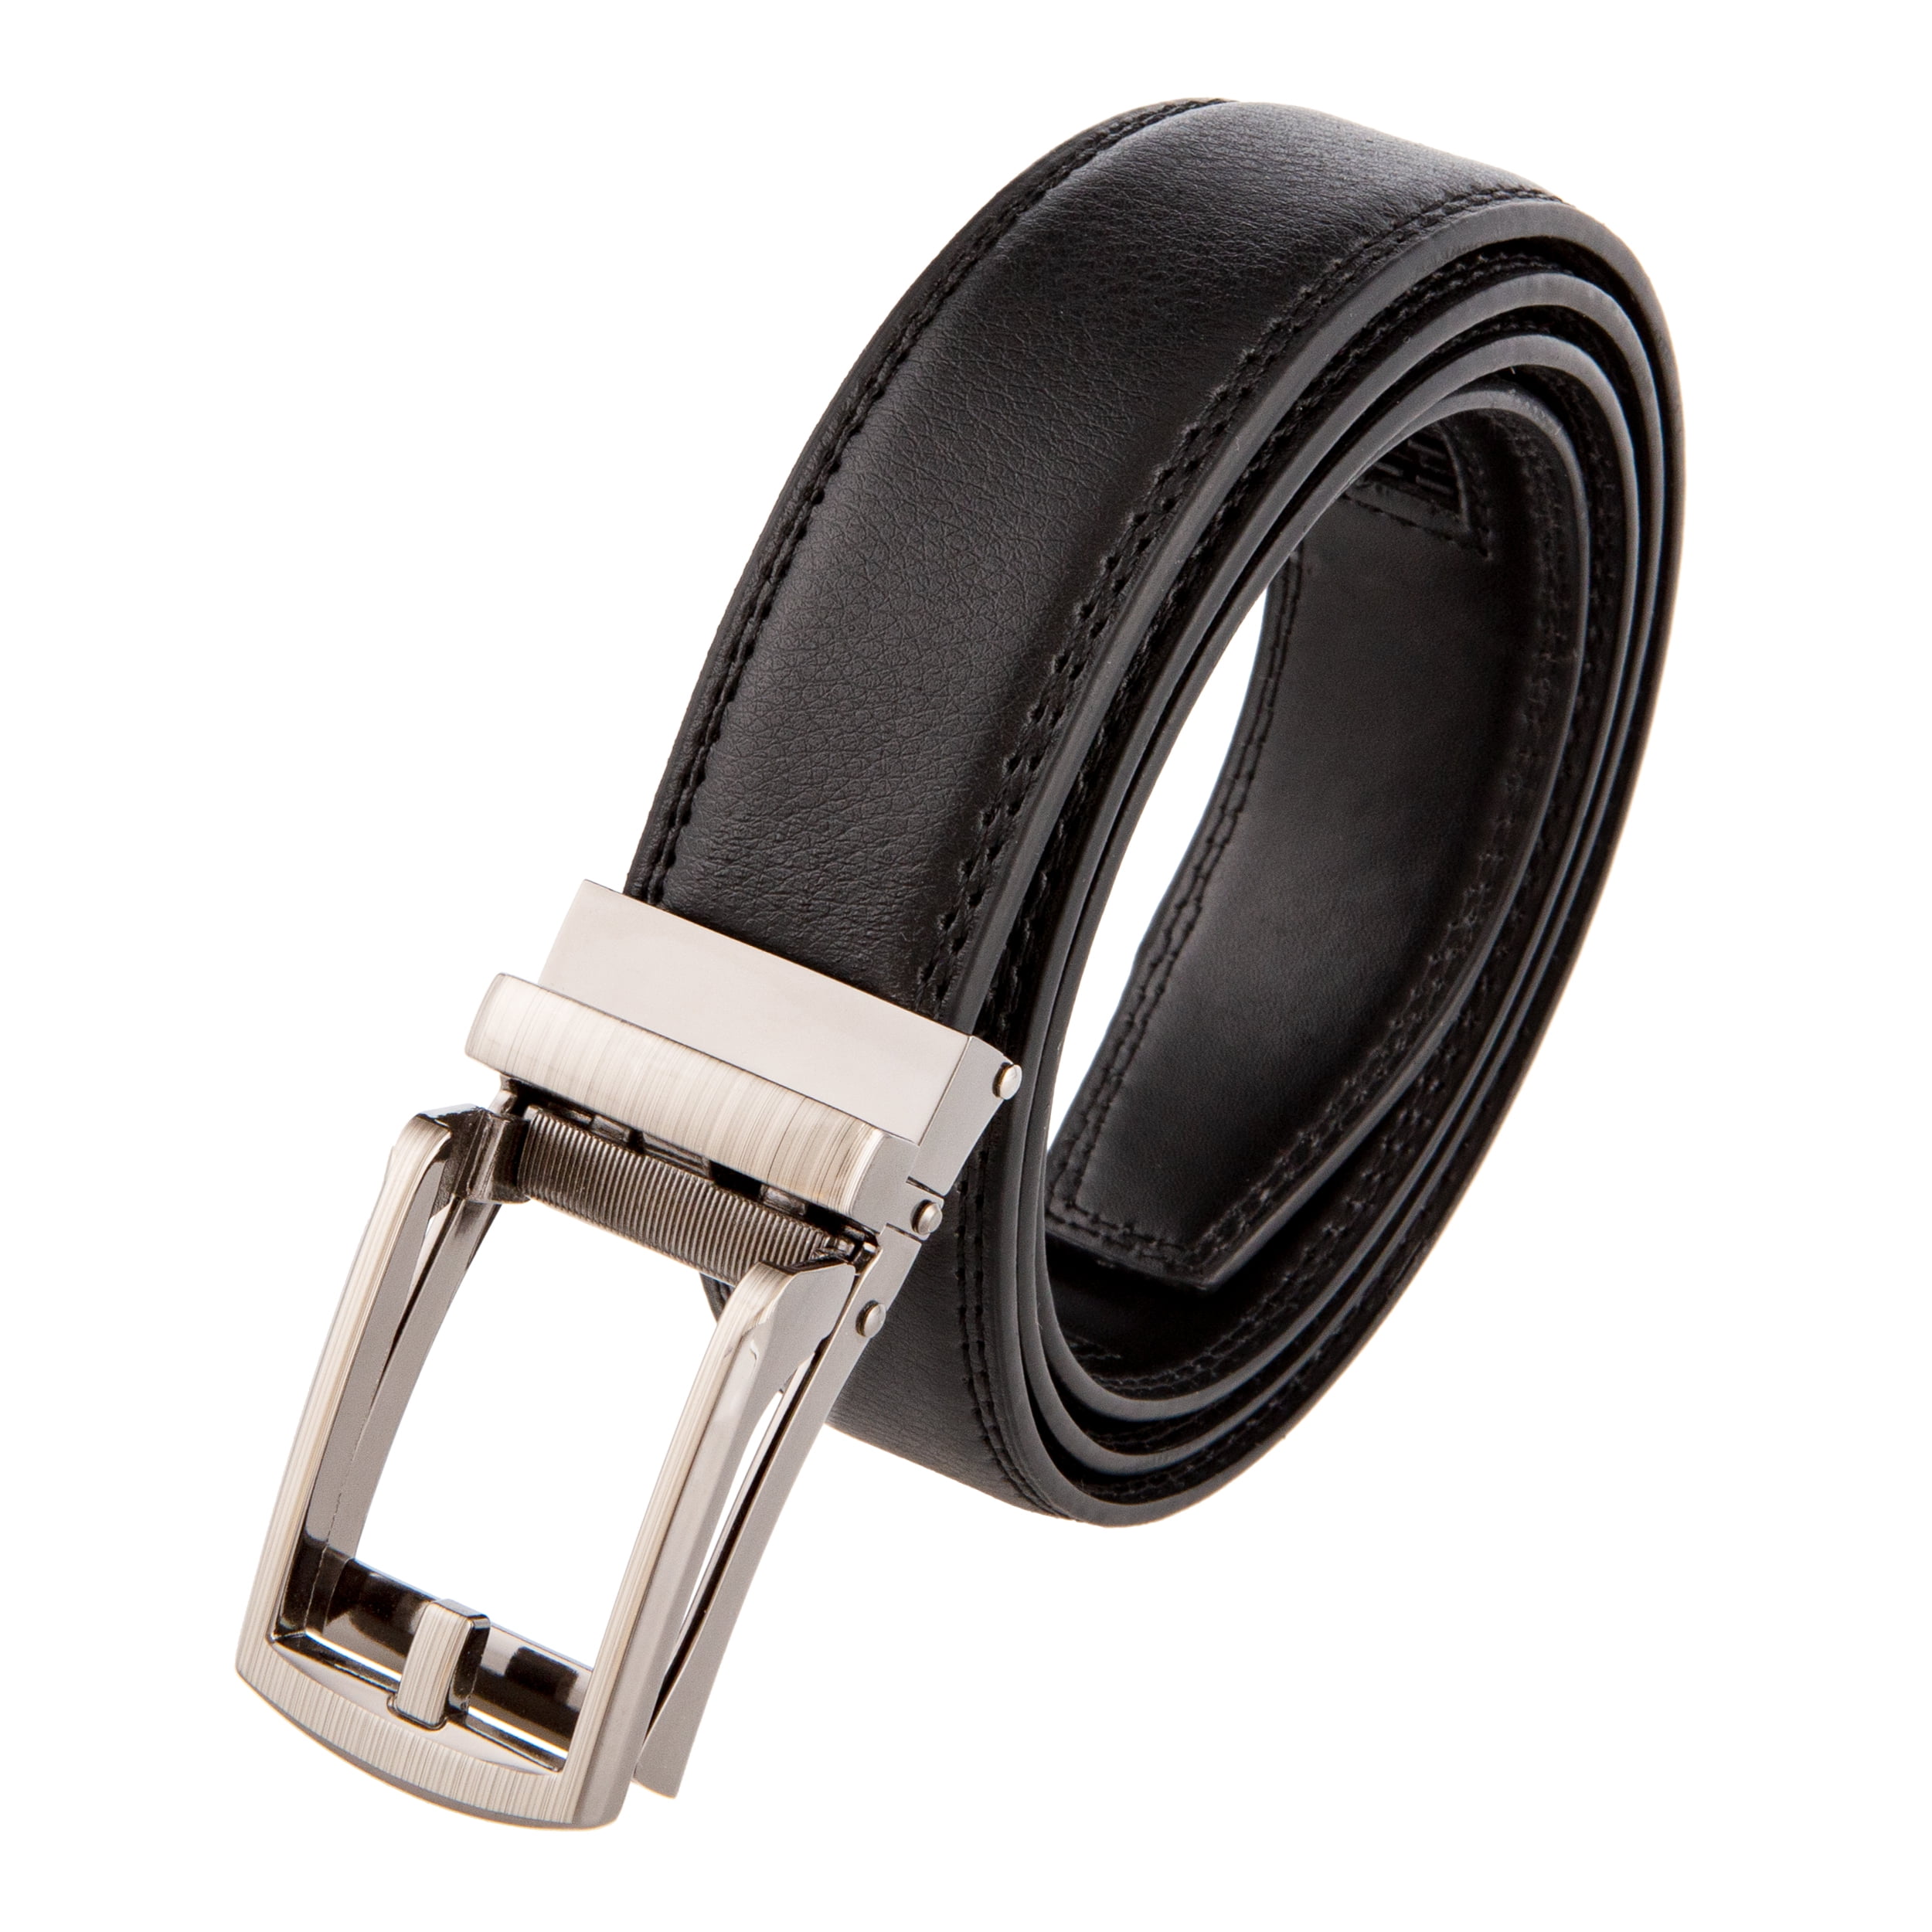 New Man's Leather Casual Comfort Dress Belt Automatic Double Stitch Click Buckle 